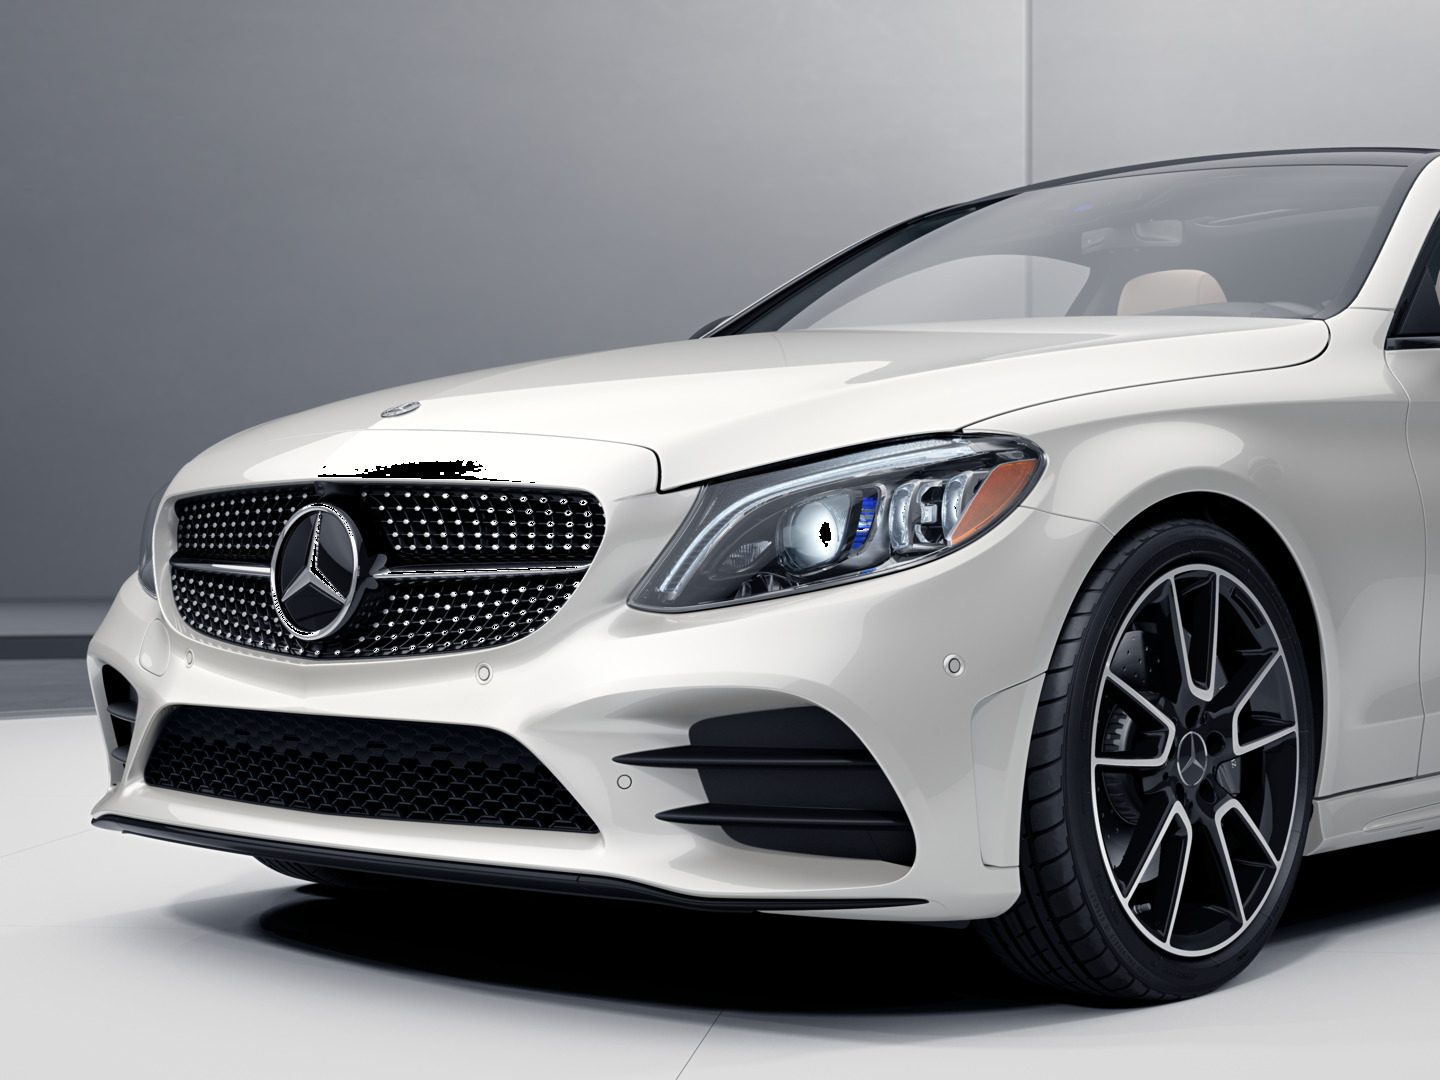 Mercedes-Benz Repair and Maintenance in Greenville, SC